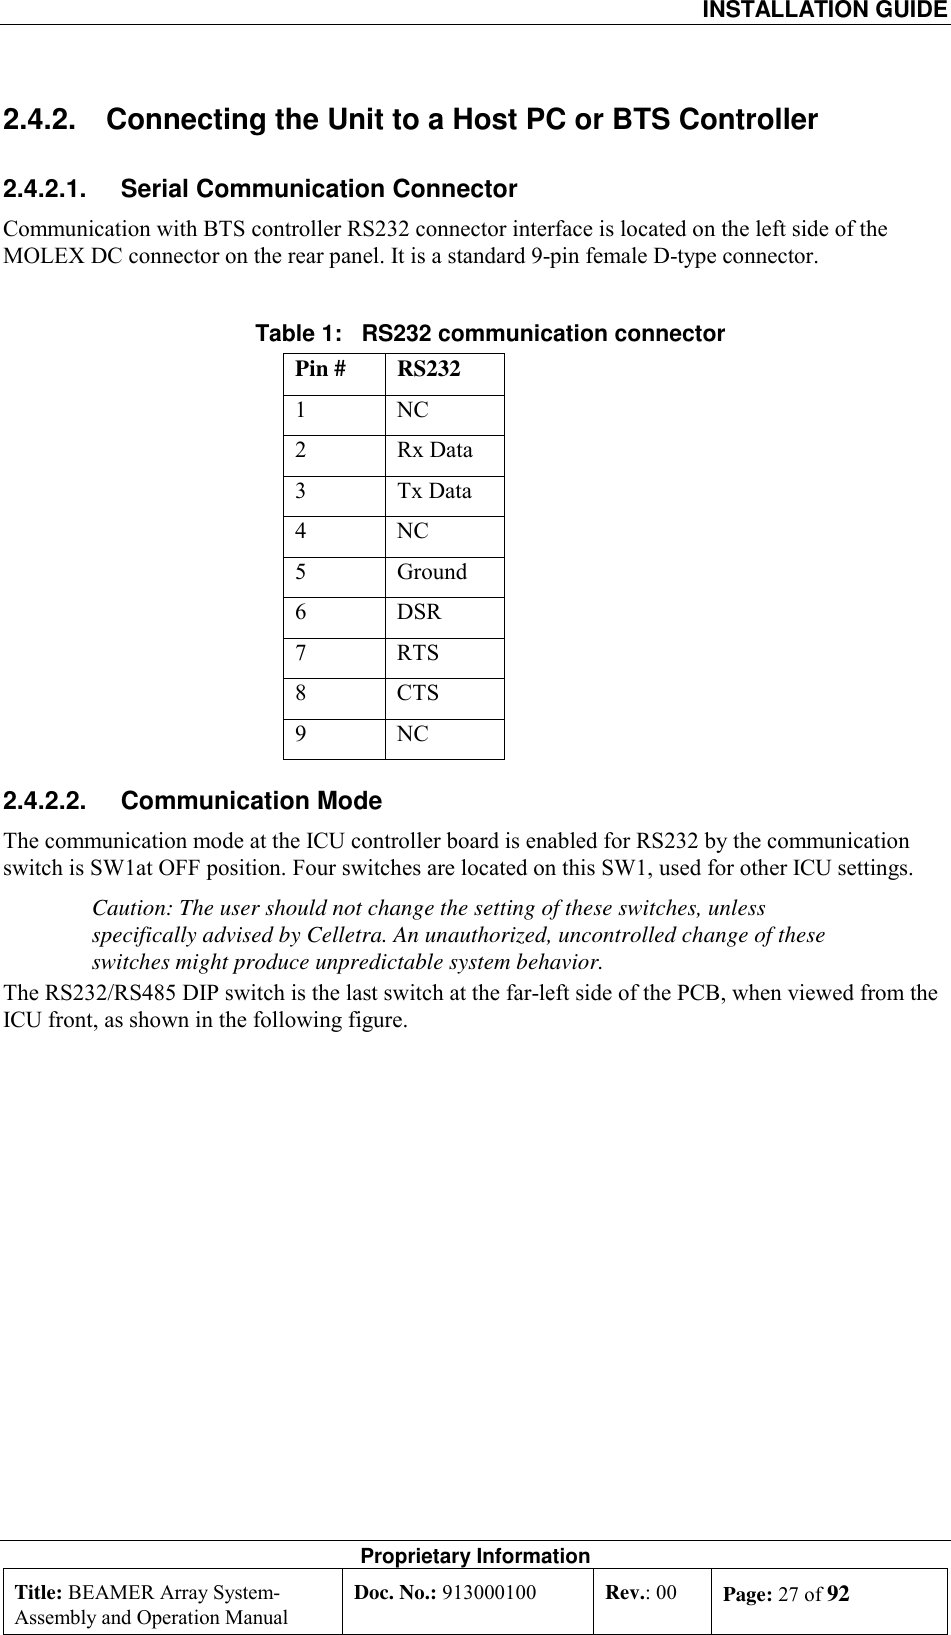  INSTALLATION GUIDE Proprietary Information Title: BEAMER Array System- Assembly and Operation Manual Doc. No.: 913000100  Rev.: 00  Page: 27 of 92  2.4.2.  Connecting the Unit to a Host PC or BTS Controller 2.4.2.1.  Serial Communication Connector Communication with BTS controller RS232 connector interface is located on the left side of the MOLEX DC connector on the rear panel. It is a standard 9-pin female D-type connector.   Table 1:   RS232 communication connector  Pin #  RS232 1 NC 2 Rx Data 3 Tx Data 4 NC 5 Ground 6 DSR 7 RTS 8 CTS 9 NC 2.4.2.2. Communication Mode The communication mode at the ICU controller board is enabled for RS232 by the communication switch is SW1at OFF position. Four switches are located on this SW1, used for other ICU settings.  Caution: The user should not change the setting of these switches, unless specifically advised by Celletra. An unauthorized, uncontrolled change of these switches might produce unpredictable system behavior.  The RS232/RS485 DIP switch is the last switch at the far-left side of the PCB, when viewed from the ICU front, as shown in the following figure. 